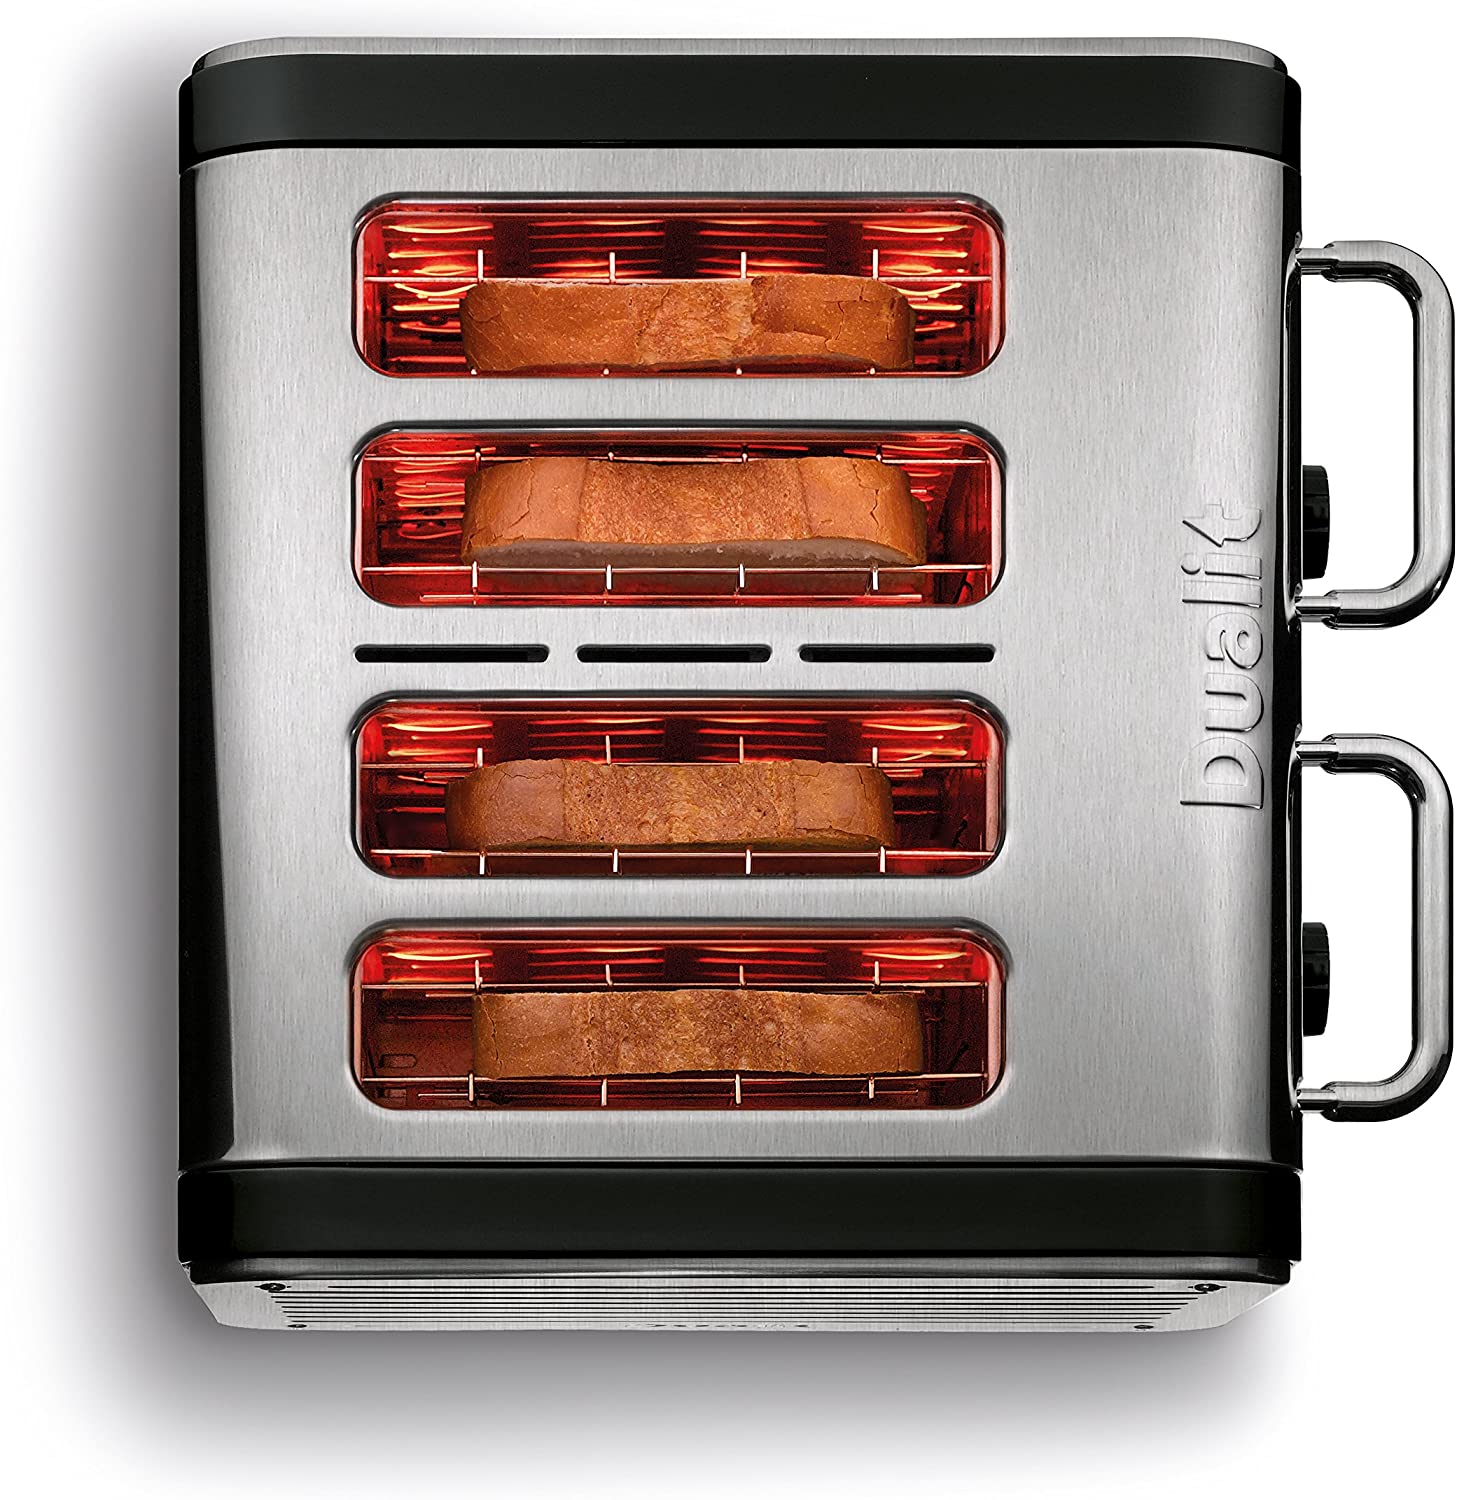 Dualit Architect 1.5L Kettle and 4 Slot Toaster Set in Black